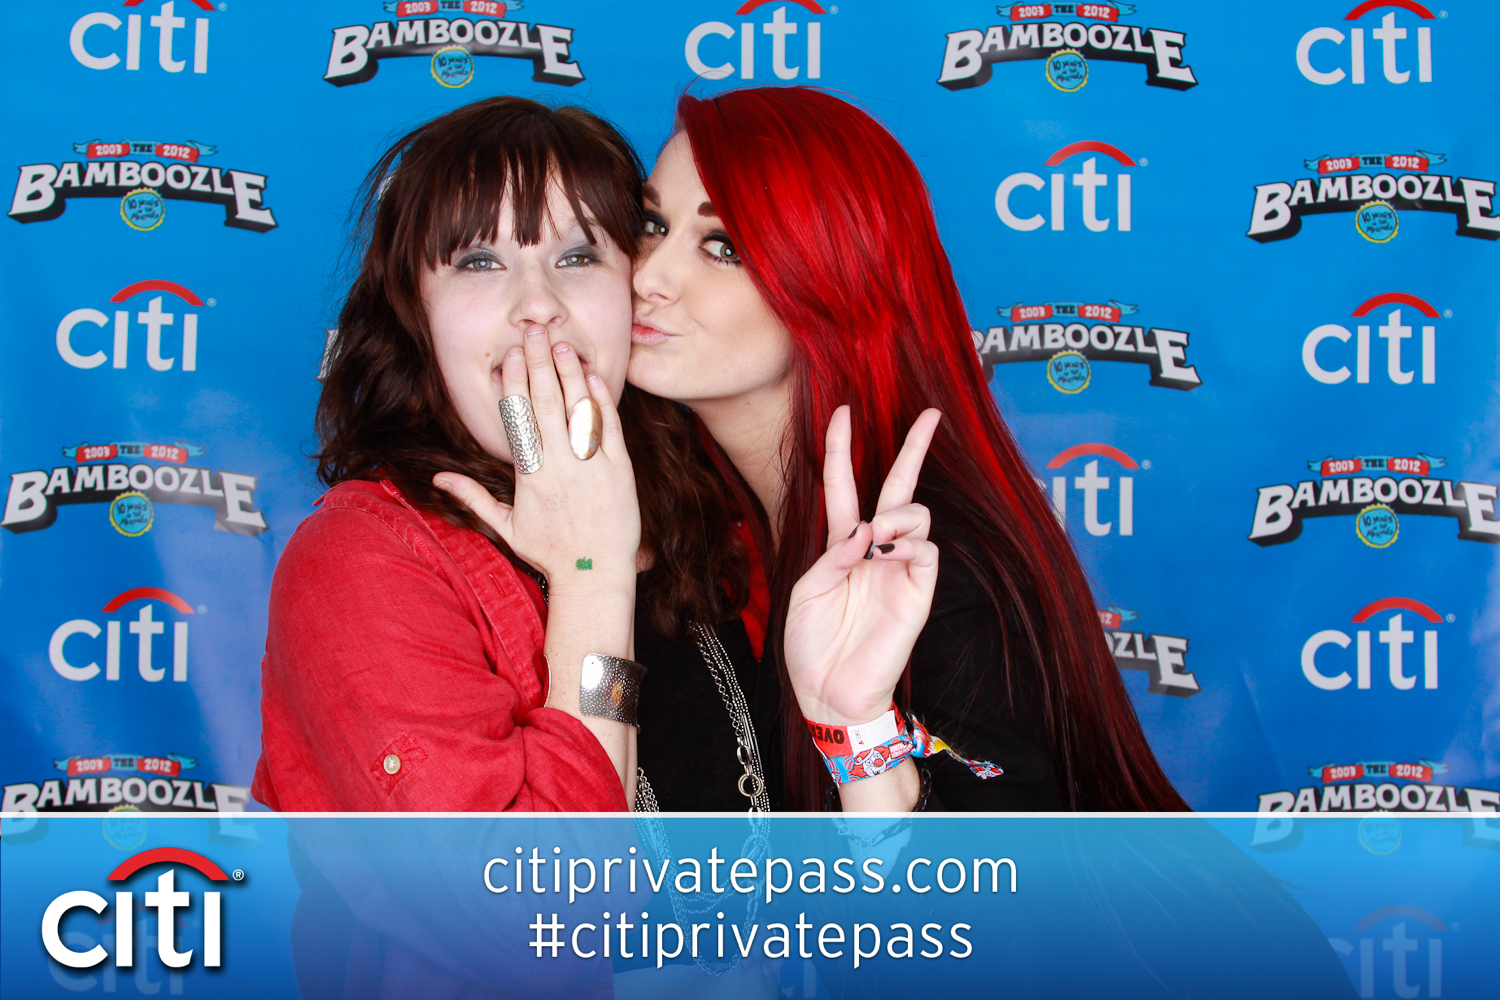 Citi Private Pass Photo Booth at Bamboozle at Asbury Park, New Jersey on May 18, 2012